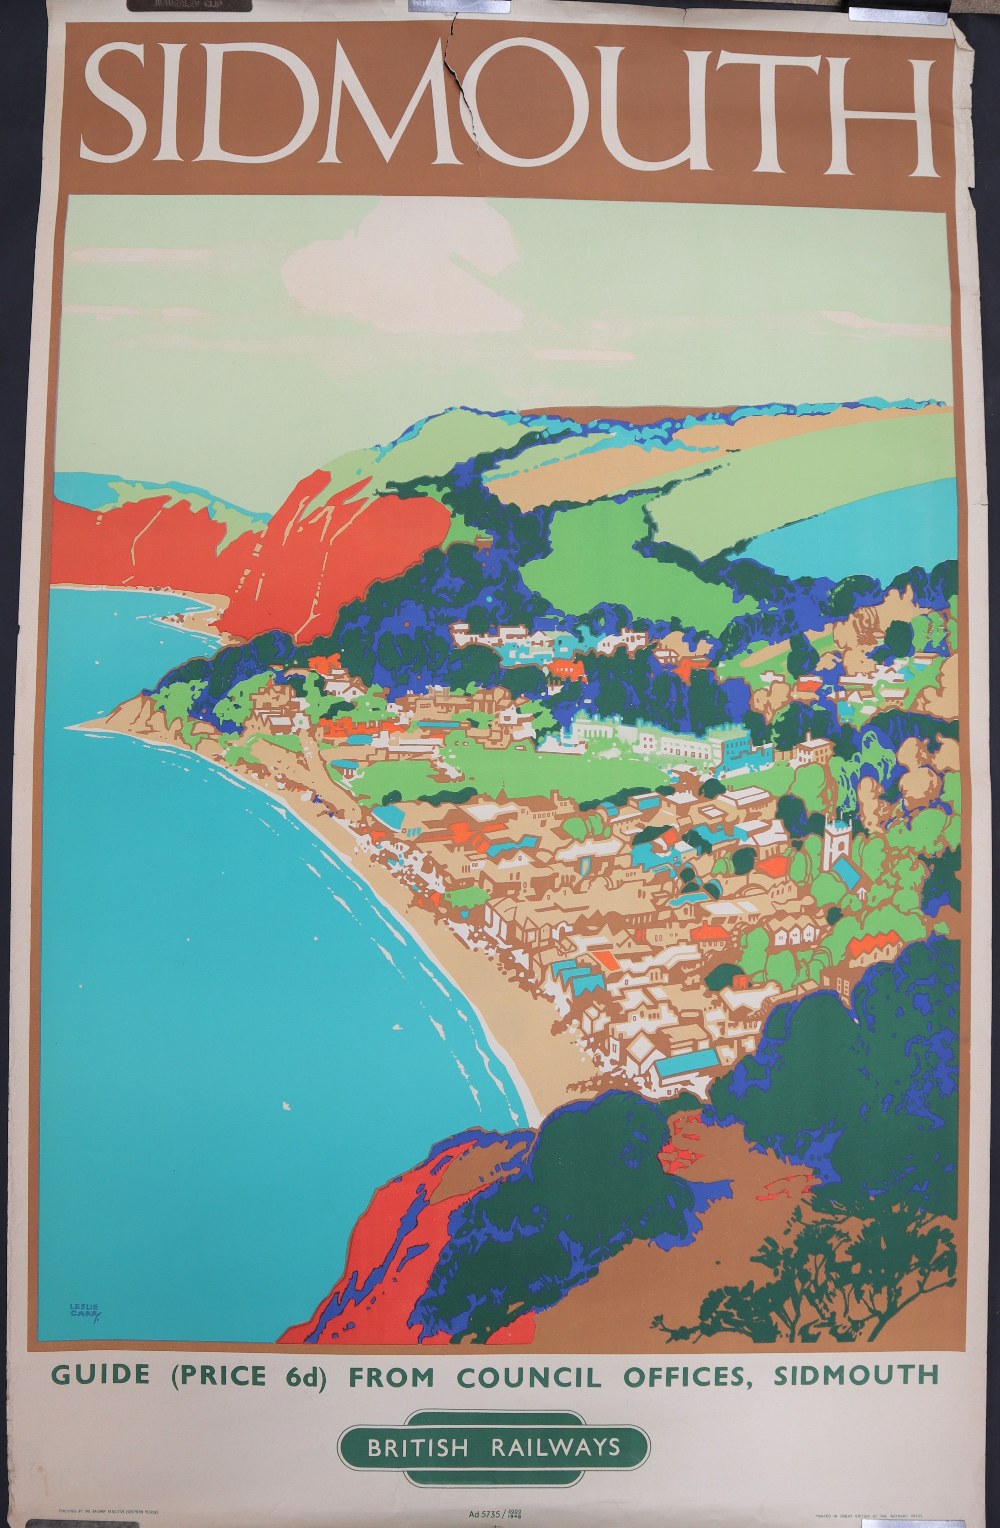 After Leslie Carr (1891-1969) Sidmouth British Railways Travel Poster Lithograph printed in colours - Image 2 of 4